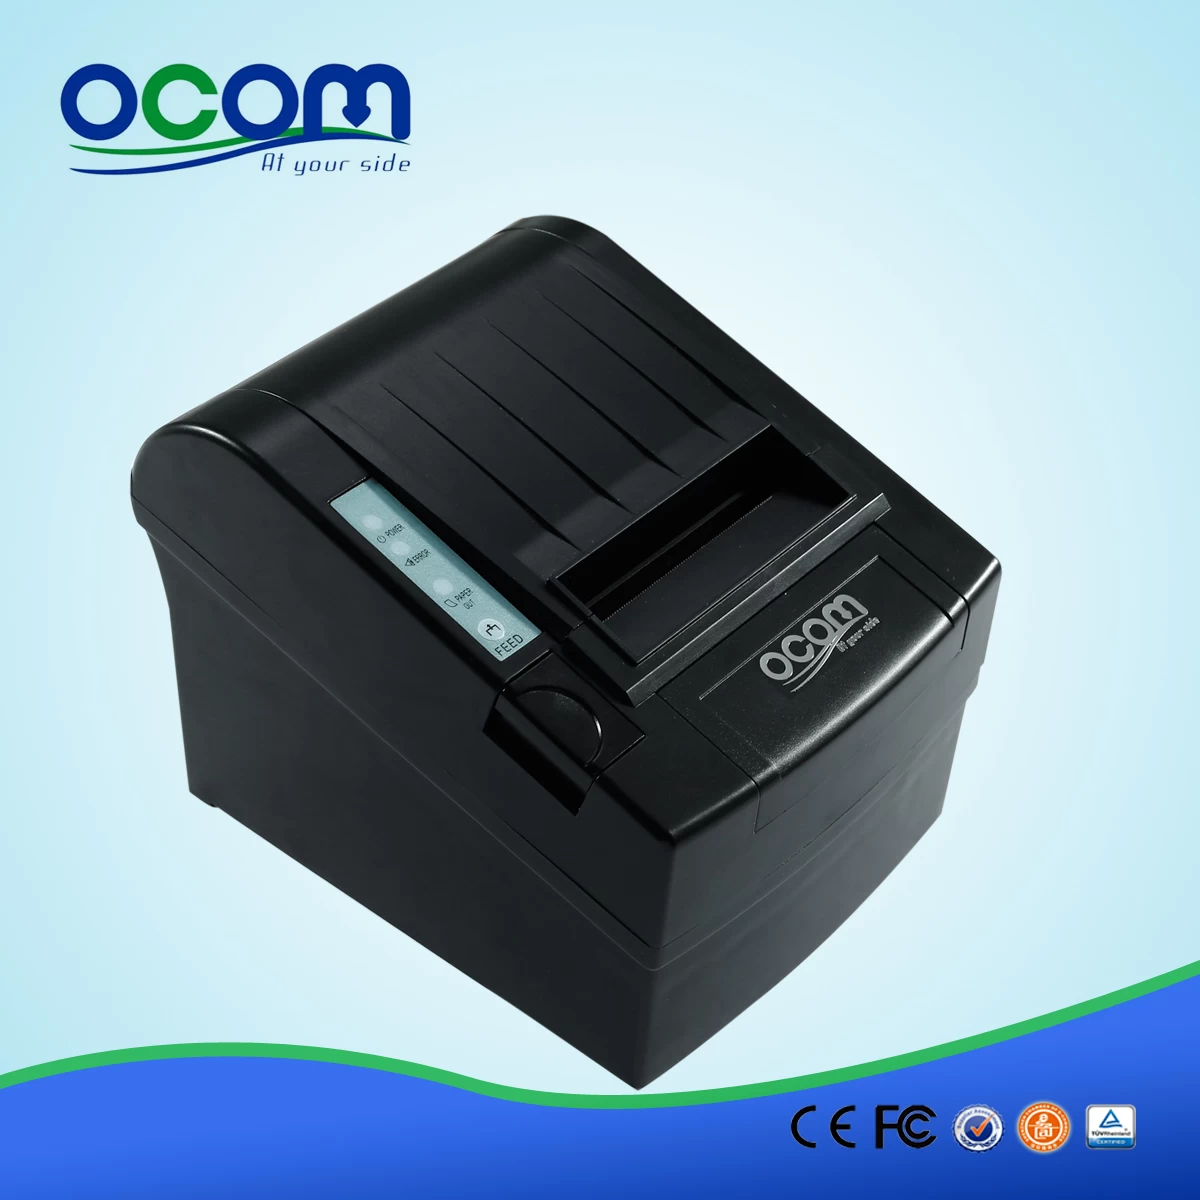 WIFI Thermal Printer 80mm Android OS OCPP-806-W